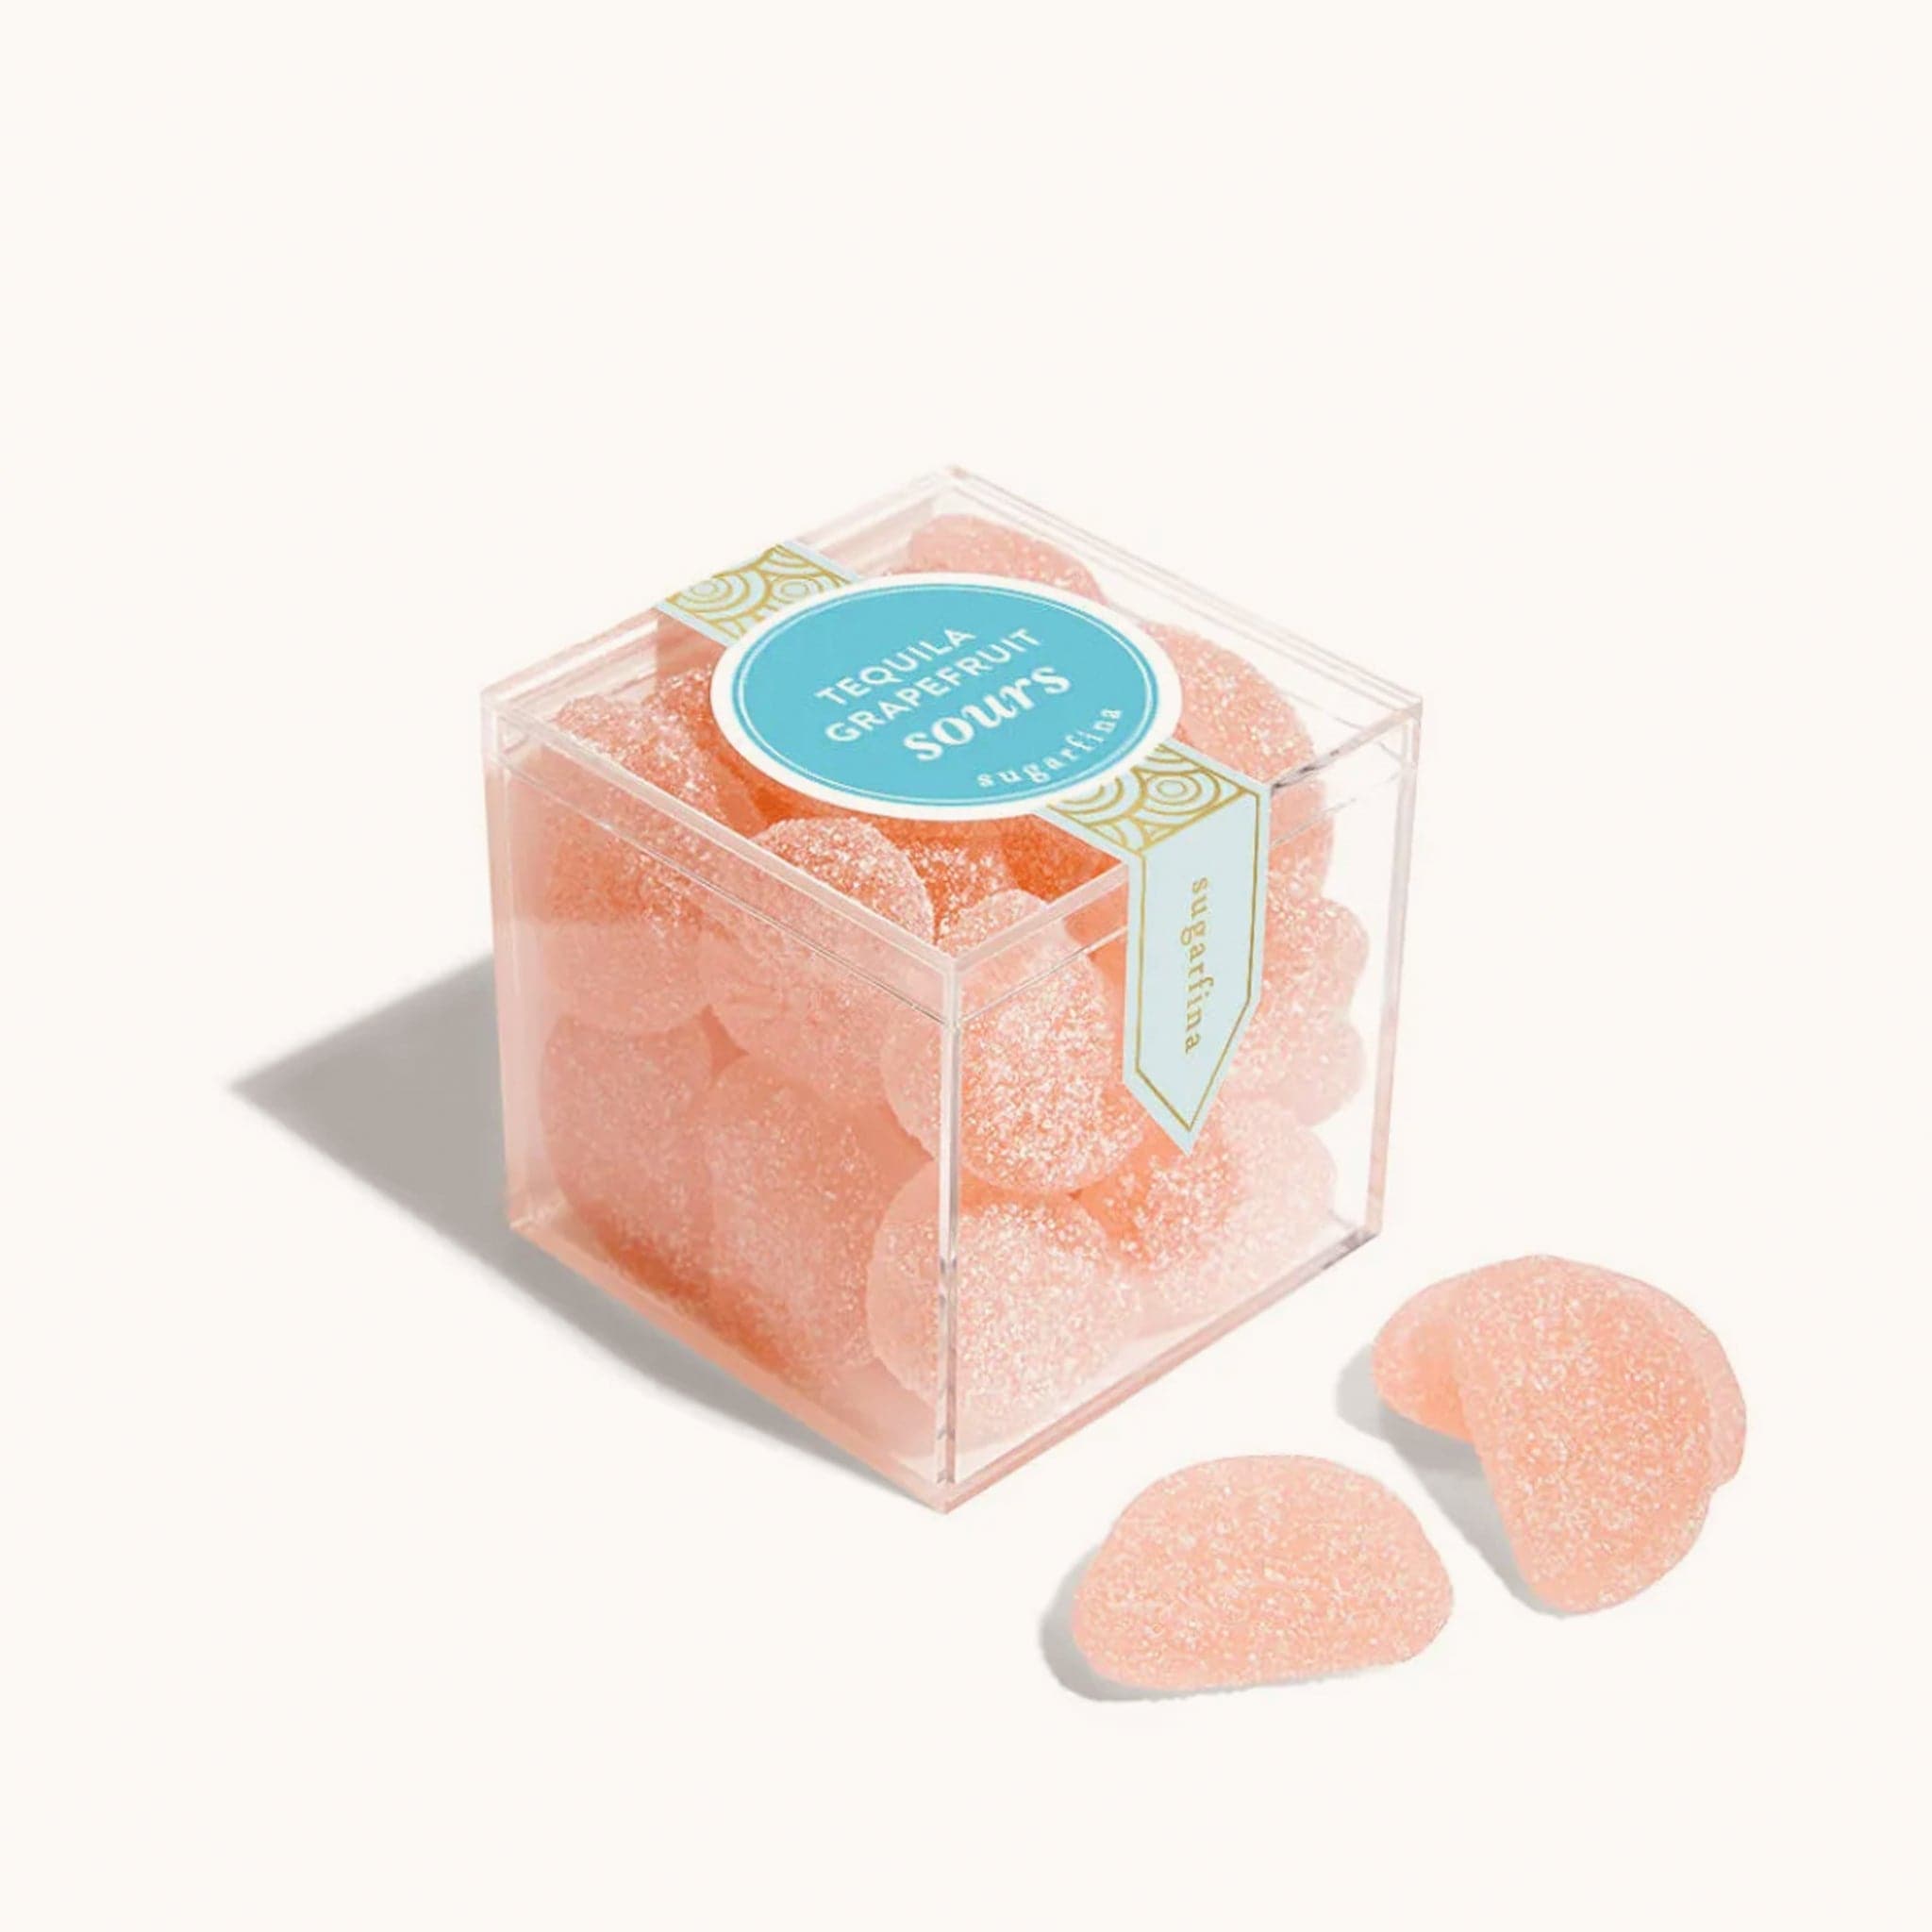 Plastic cube box filled with grapefruit gummies covered in sugar crystals. The clear box reads 'Tequila Grapefruit Sours' on a deep teal label. Three pieces are placed in front of the box.  